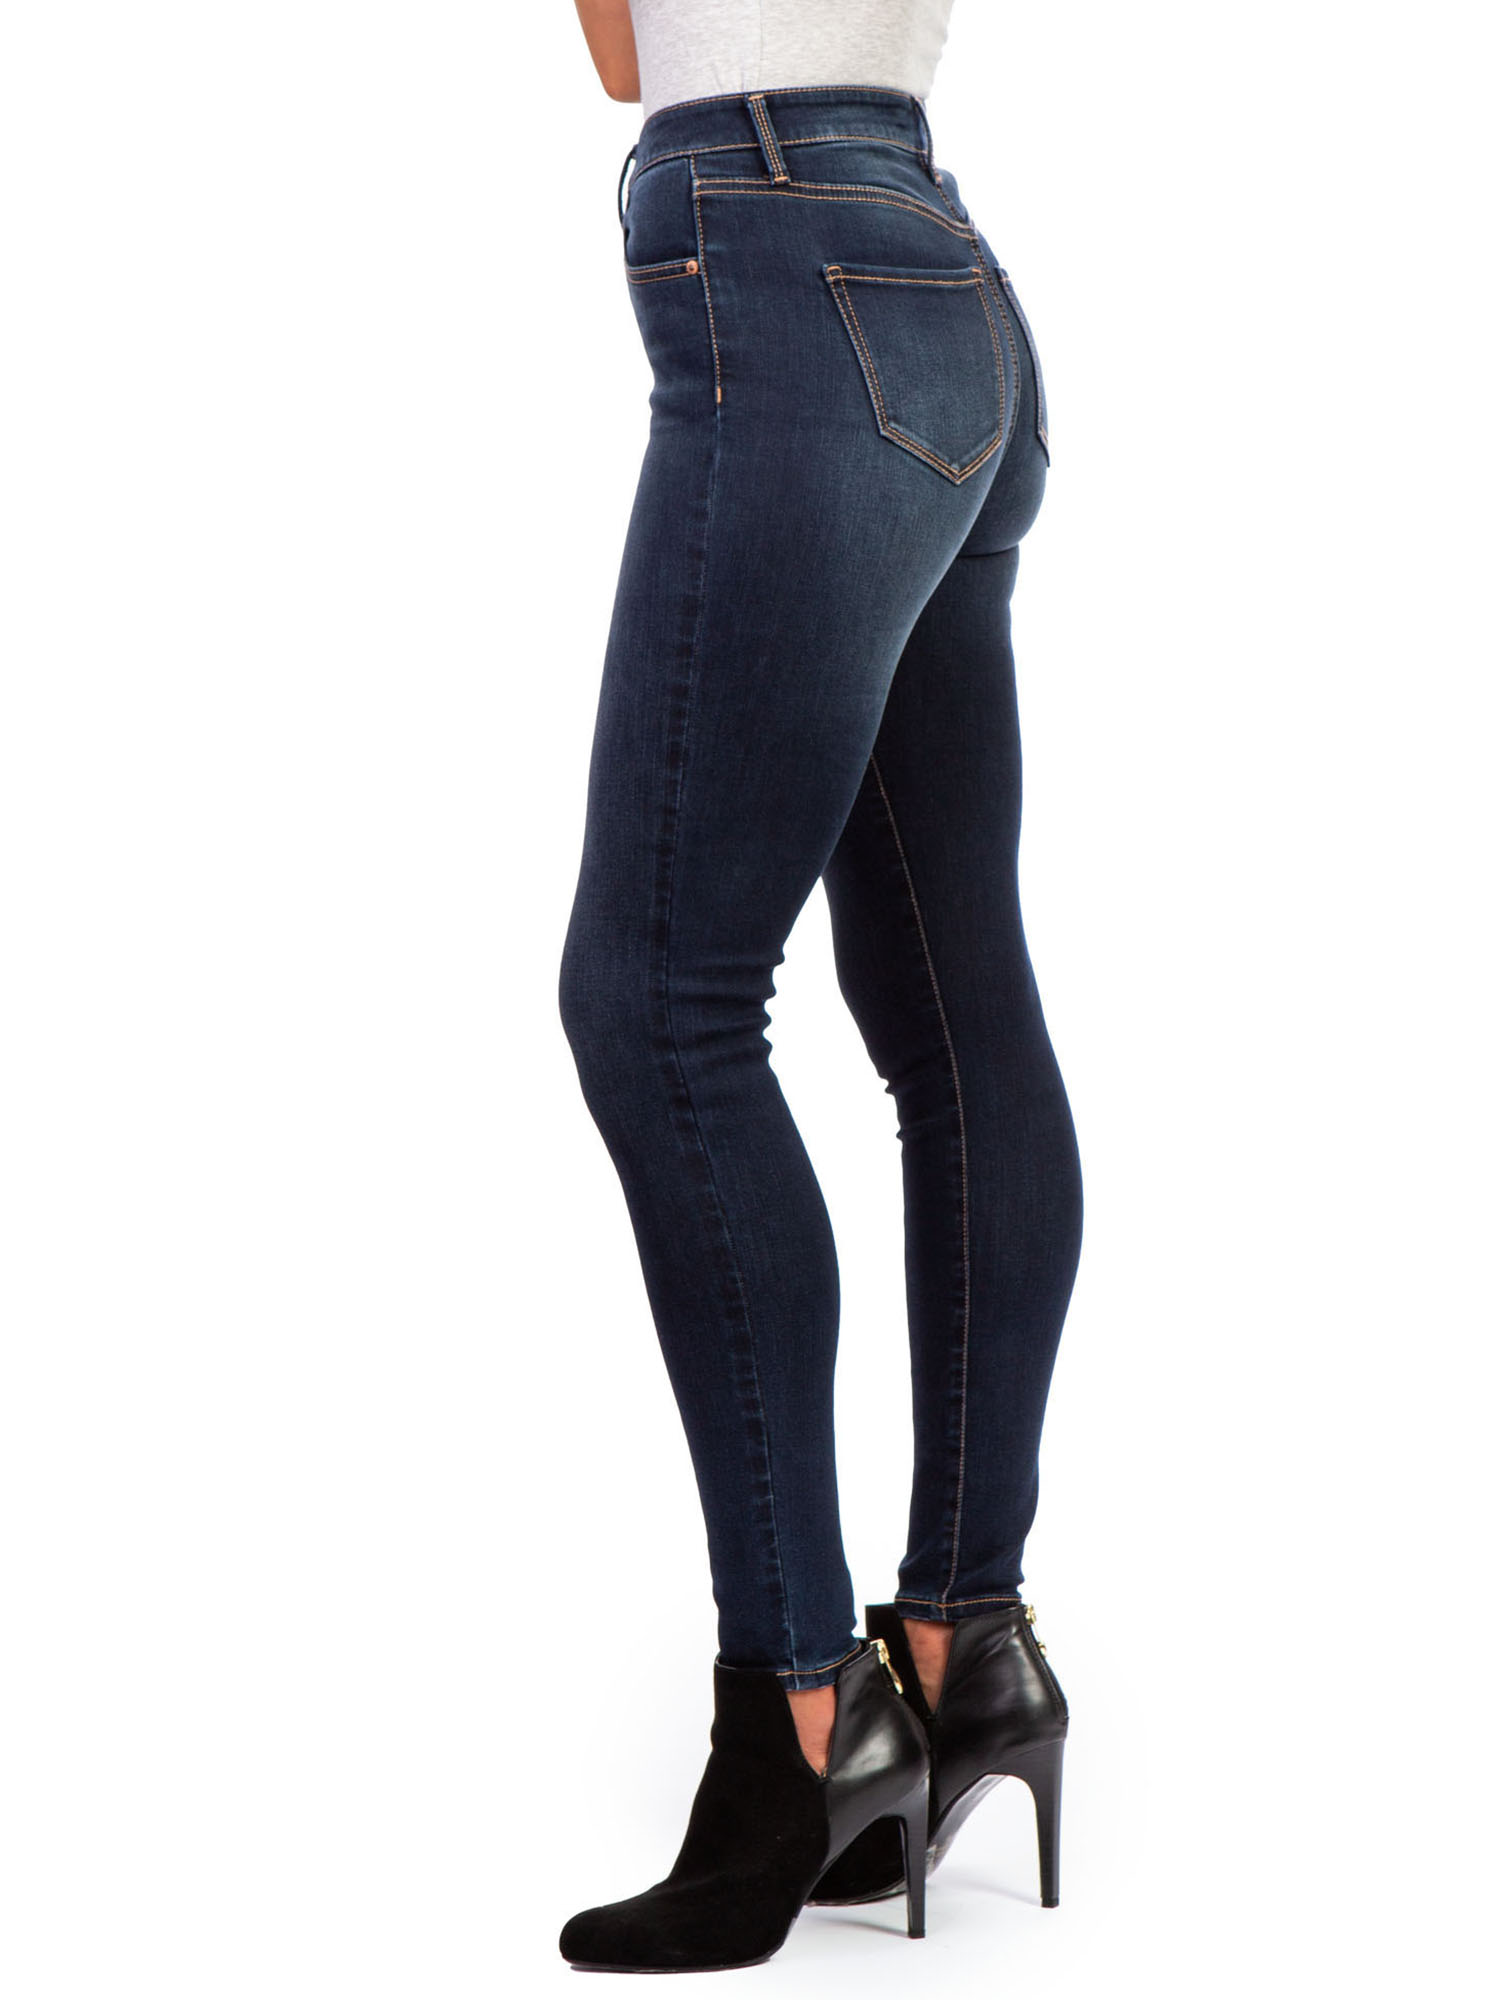 U.S. Polo Assn. High Rise Super Skinny Women's - image 5 of 5